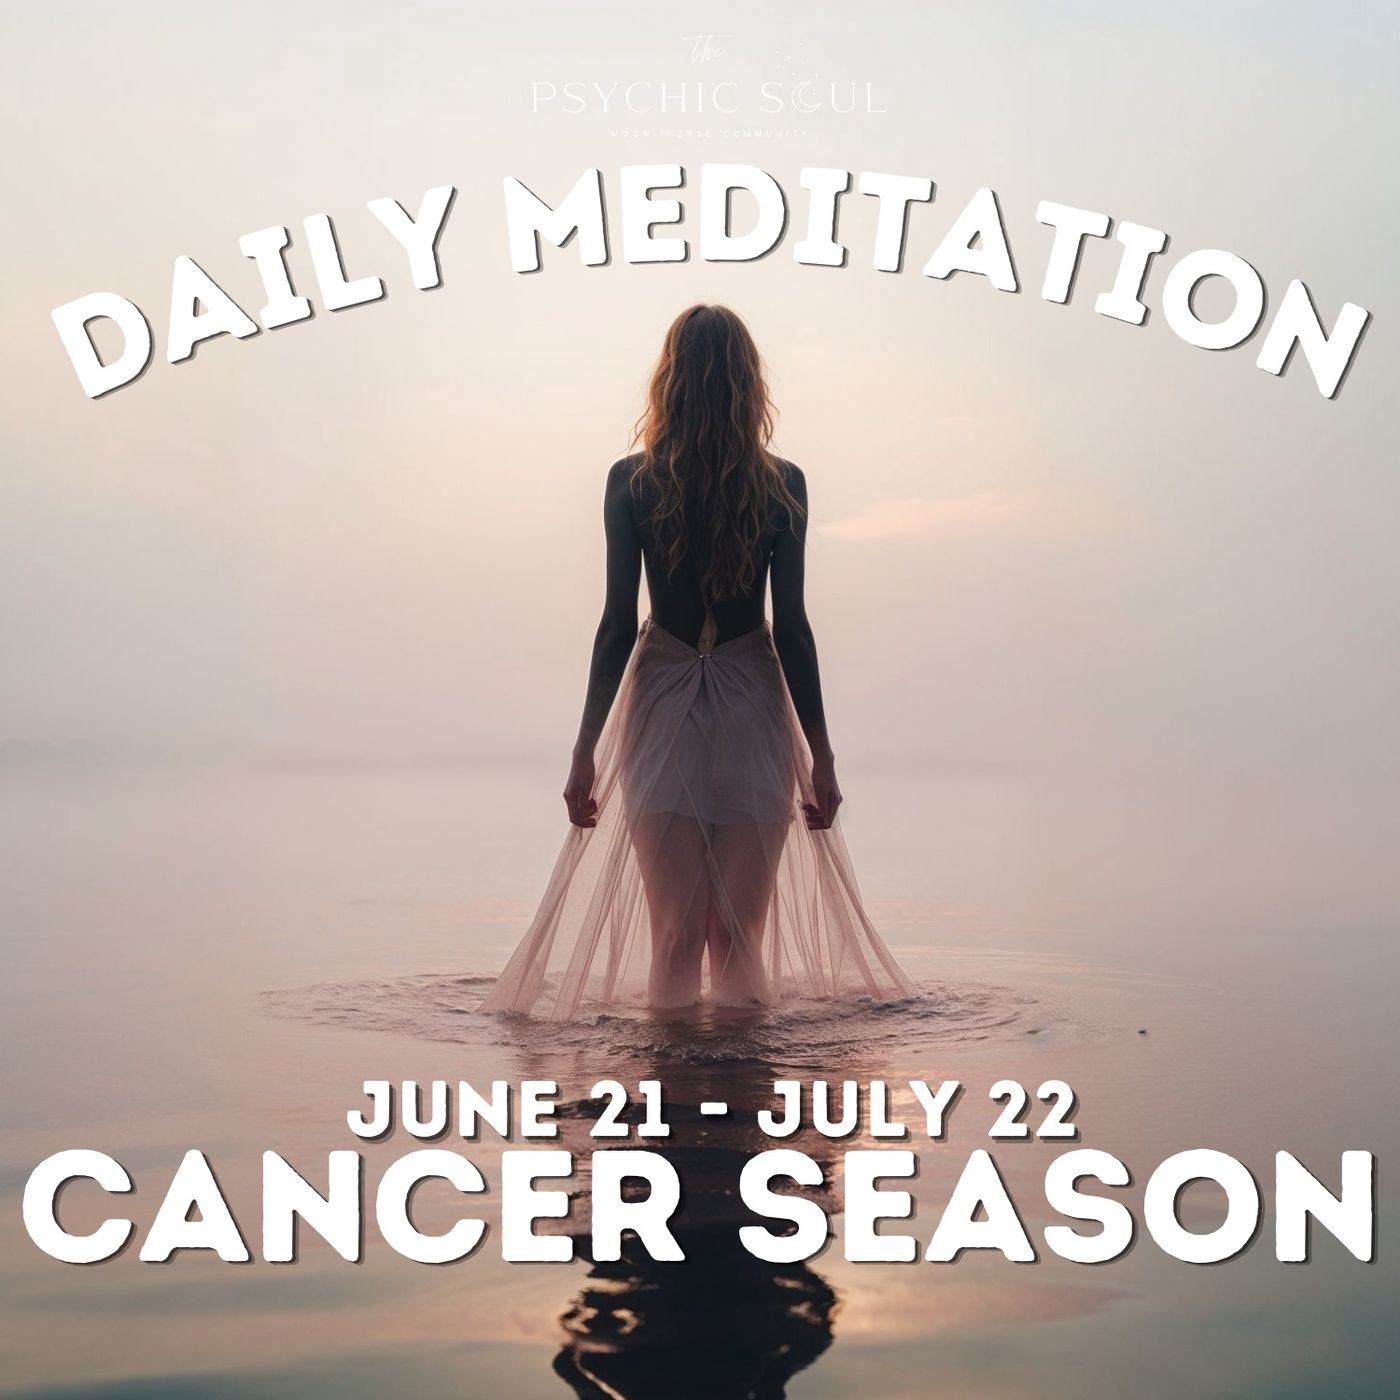 Daily Meditation | 21 June - 22 July ♋️ Cancer Season 🦀 | Deepen Connections to Nurture Your Soul